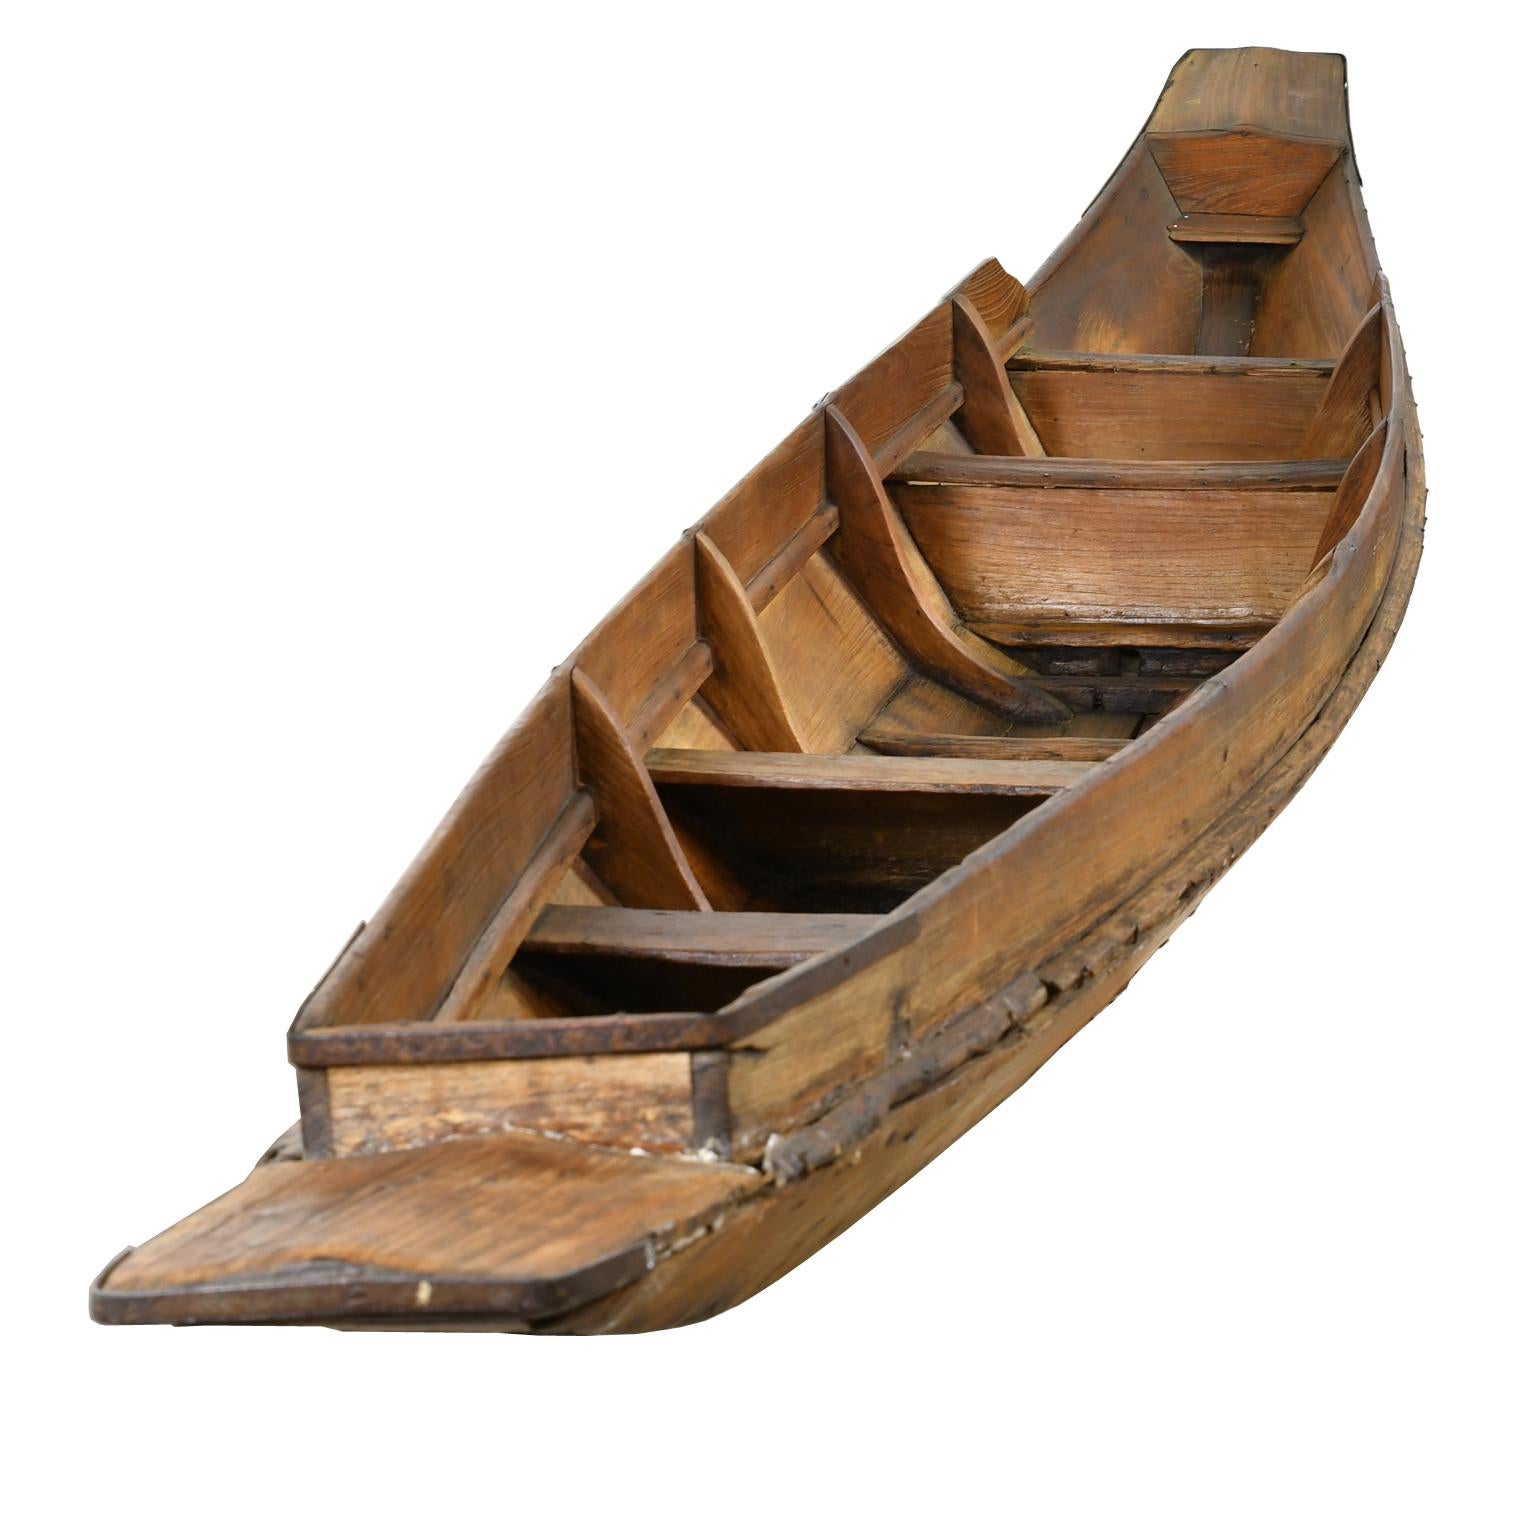 This boat could possibly be from the Sama-Bajau which refers to several Austronesian ethnic groups of Maritime Southeast Asia with their origins from the southern Philippines.
The Bajo, the world’s largest remaining sea nomad group, are scattered